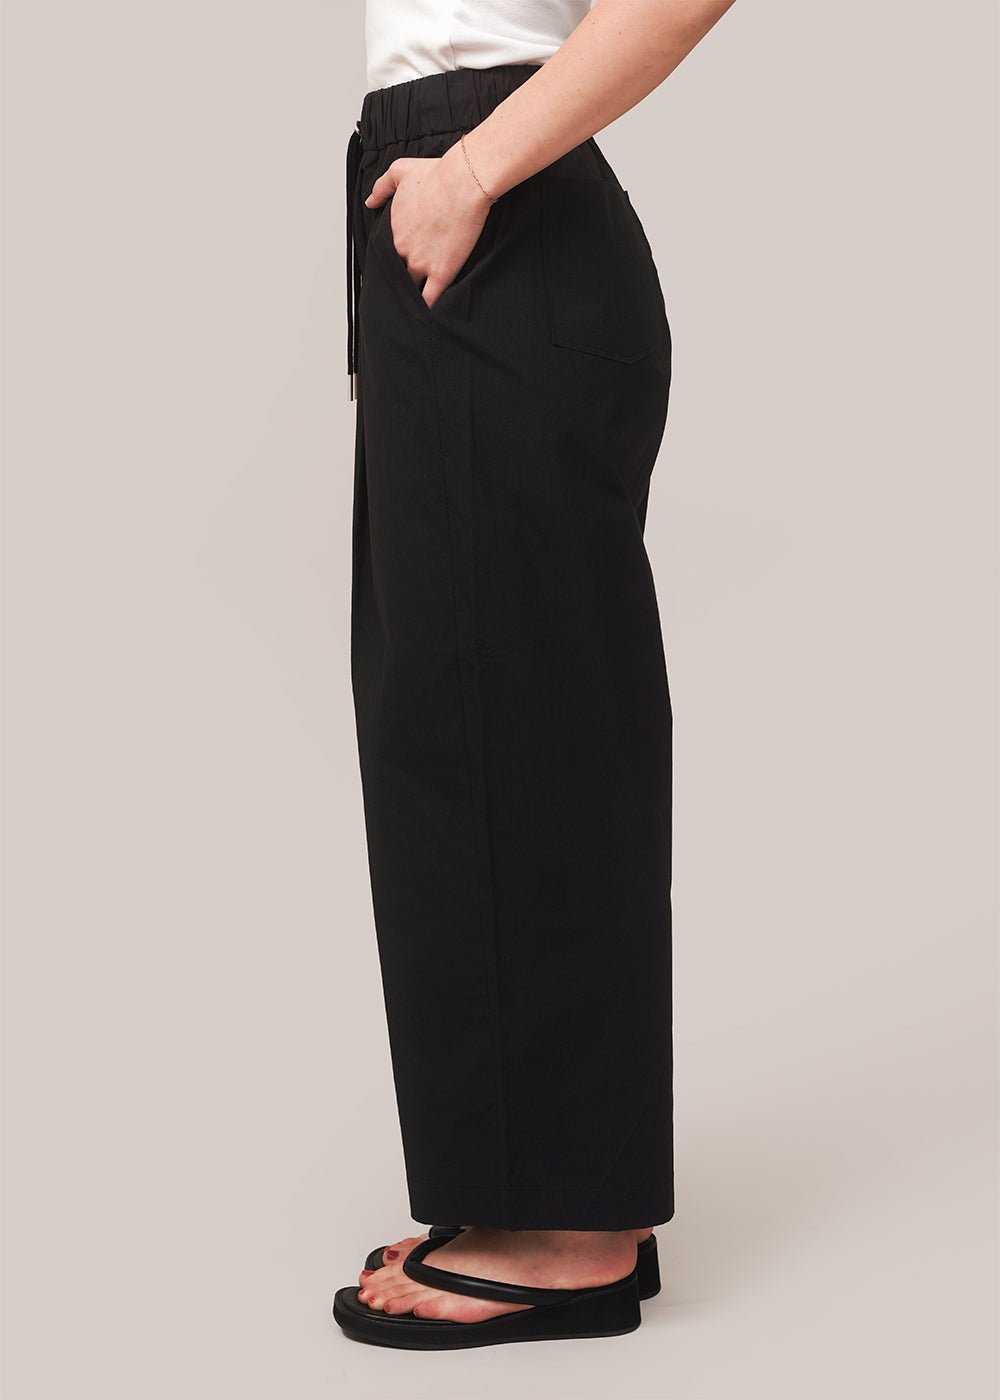 Relaxed Drawstring Pants in Black by ST. AGNI – New Classics Studios